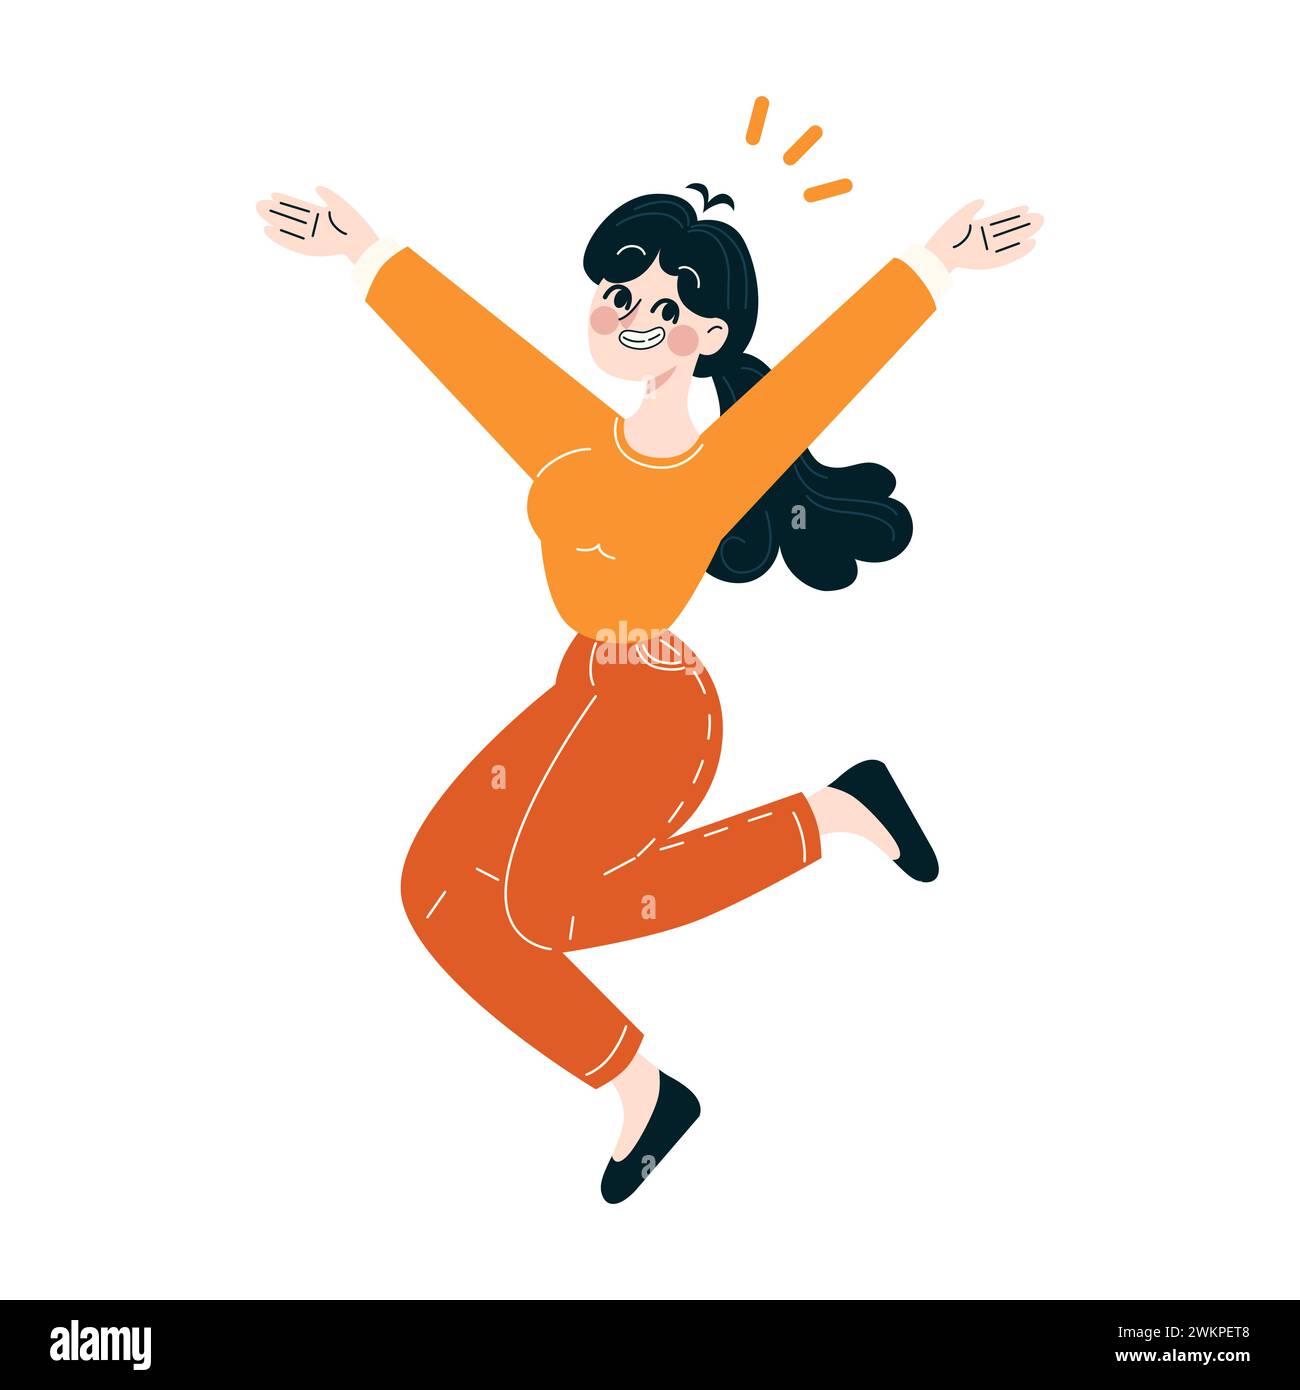 Joyful achievement in business concept. Exuberant businesswoman leaping with excitement, celebrating success with a carefree attitude. Flat vector illustration Stock Vector